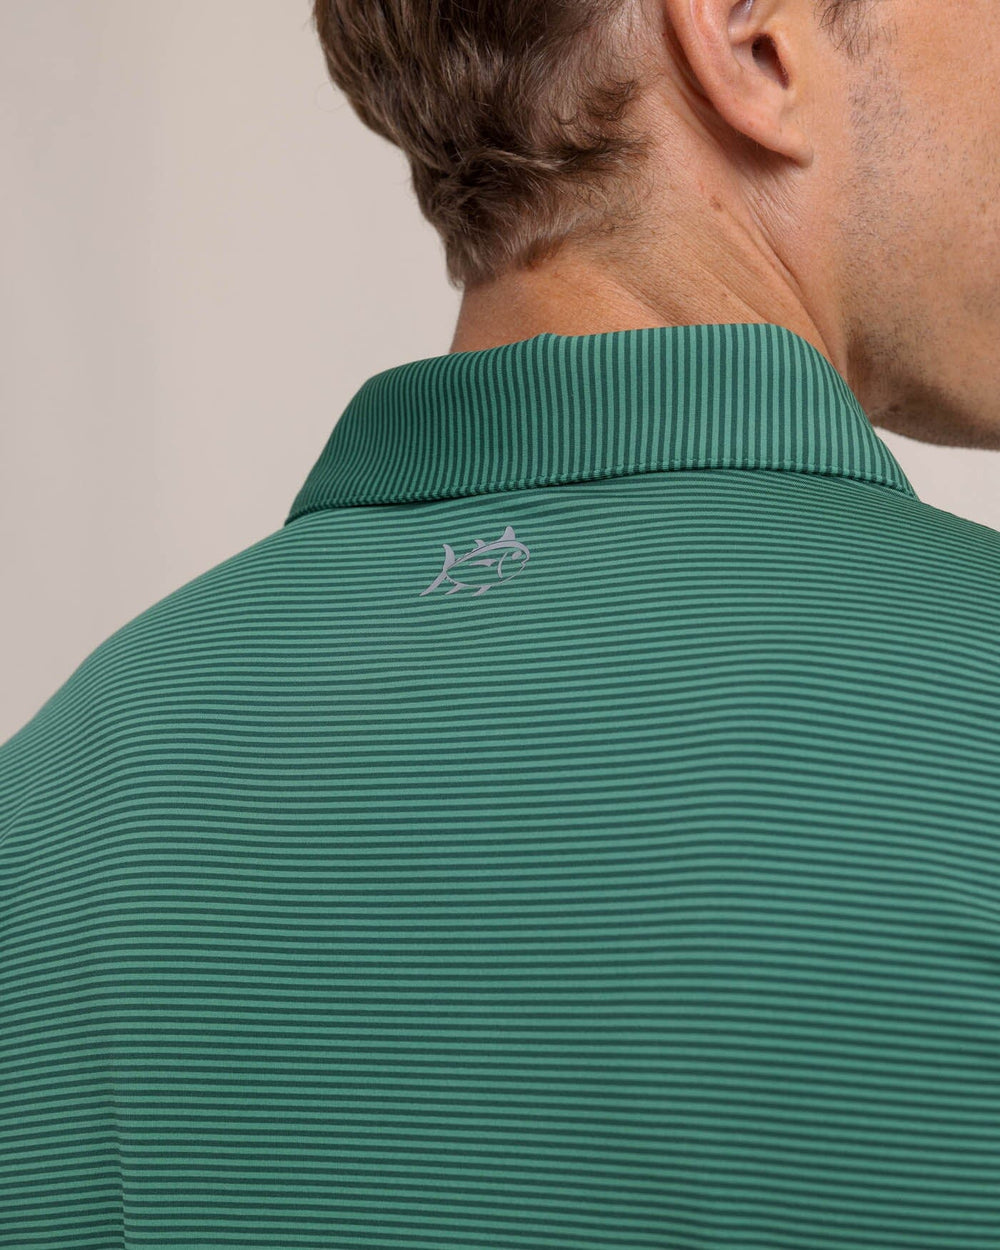 The detail view of the Southern Tide brrr-eeze Meadowbrook Stripe Polo by Southern Tide - Fir